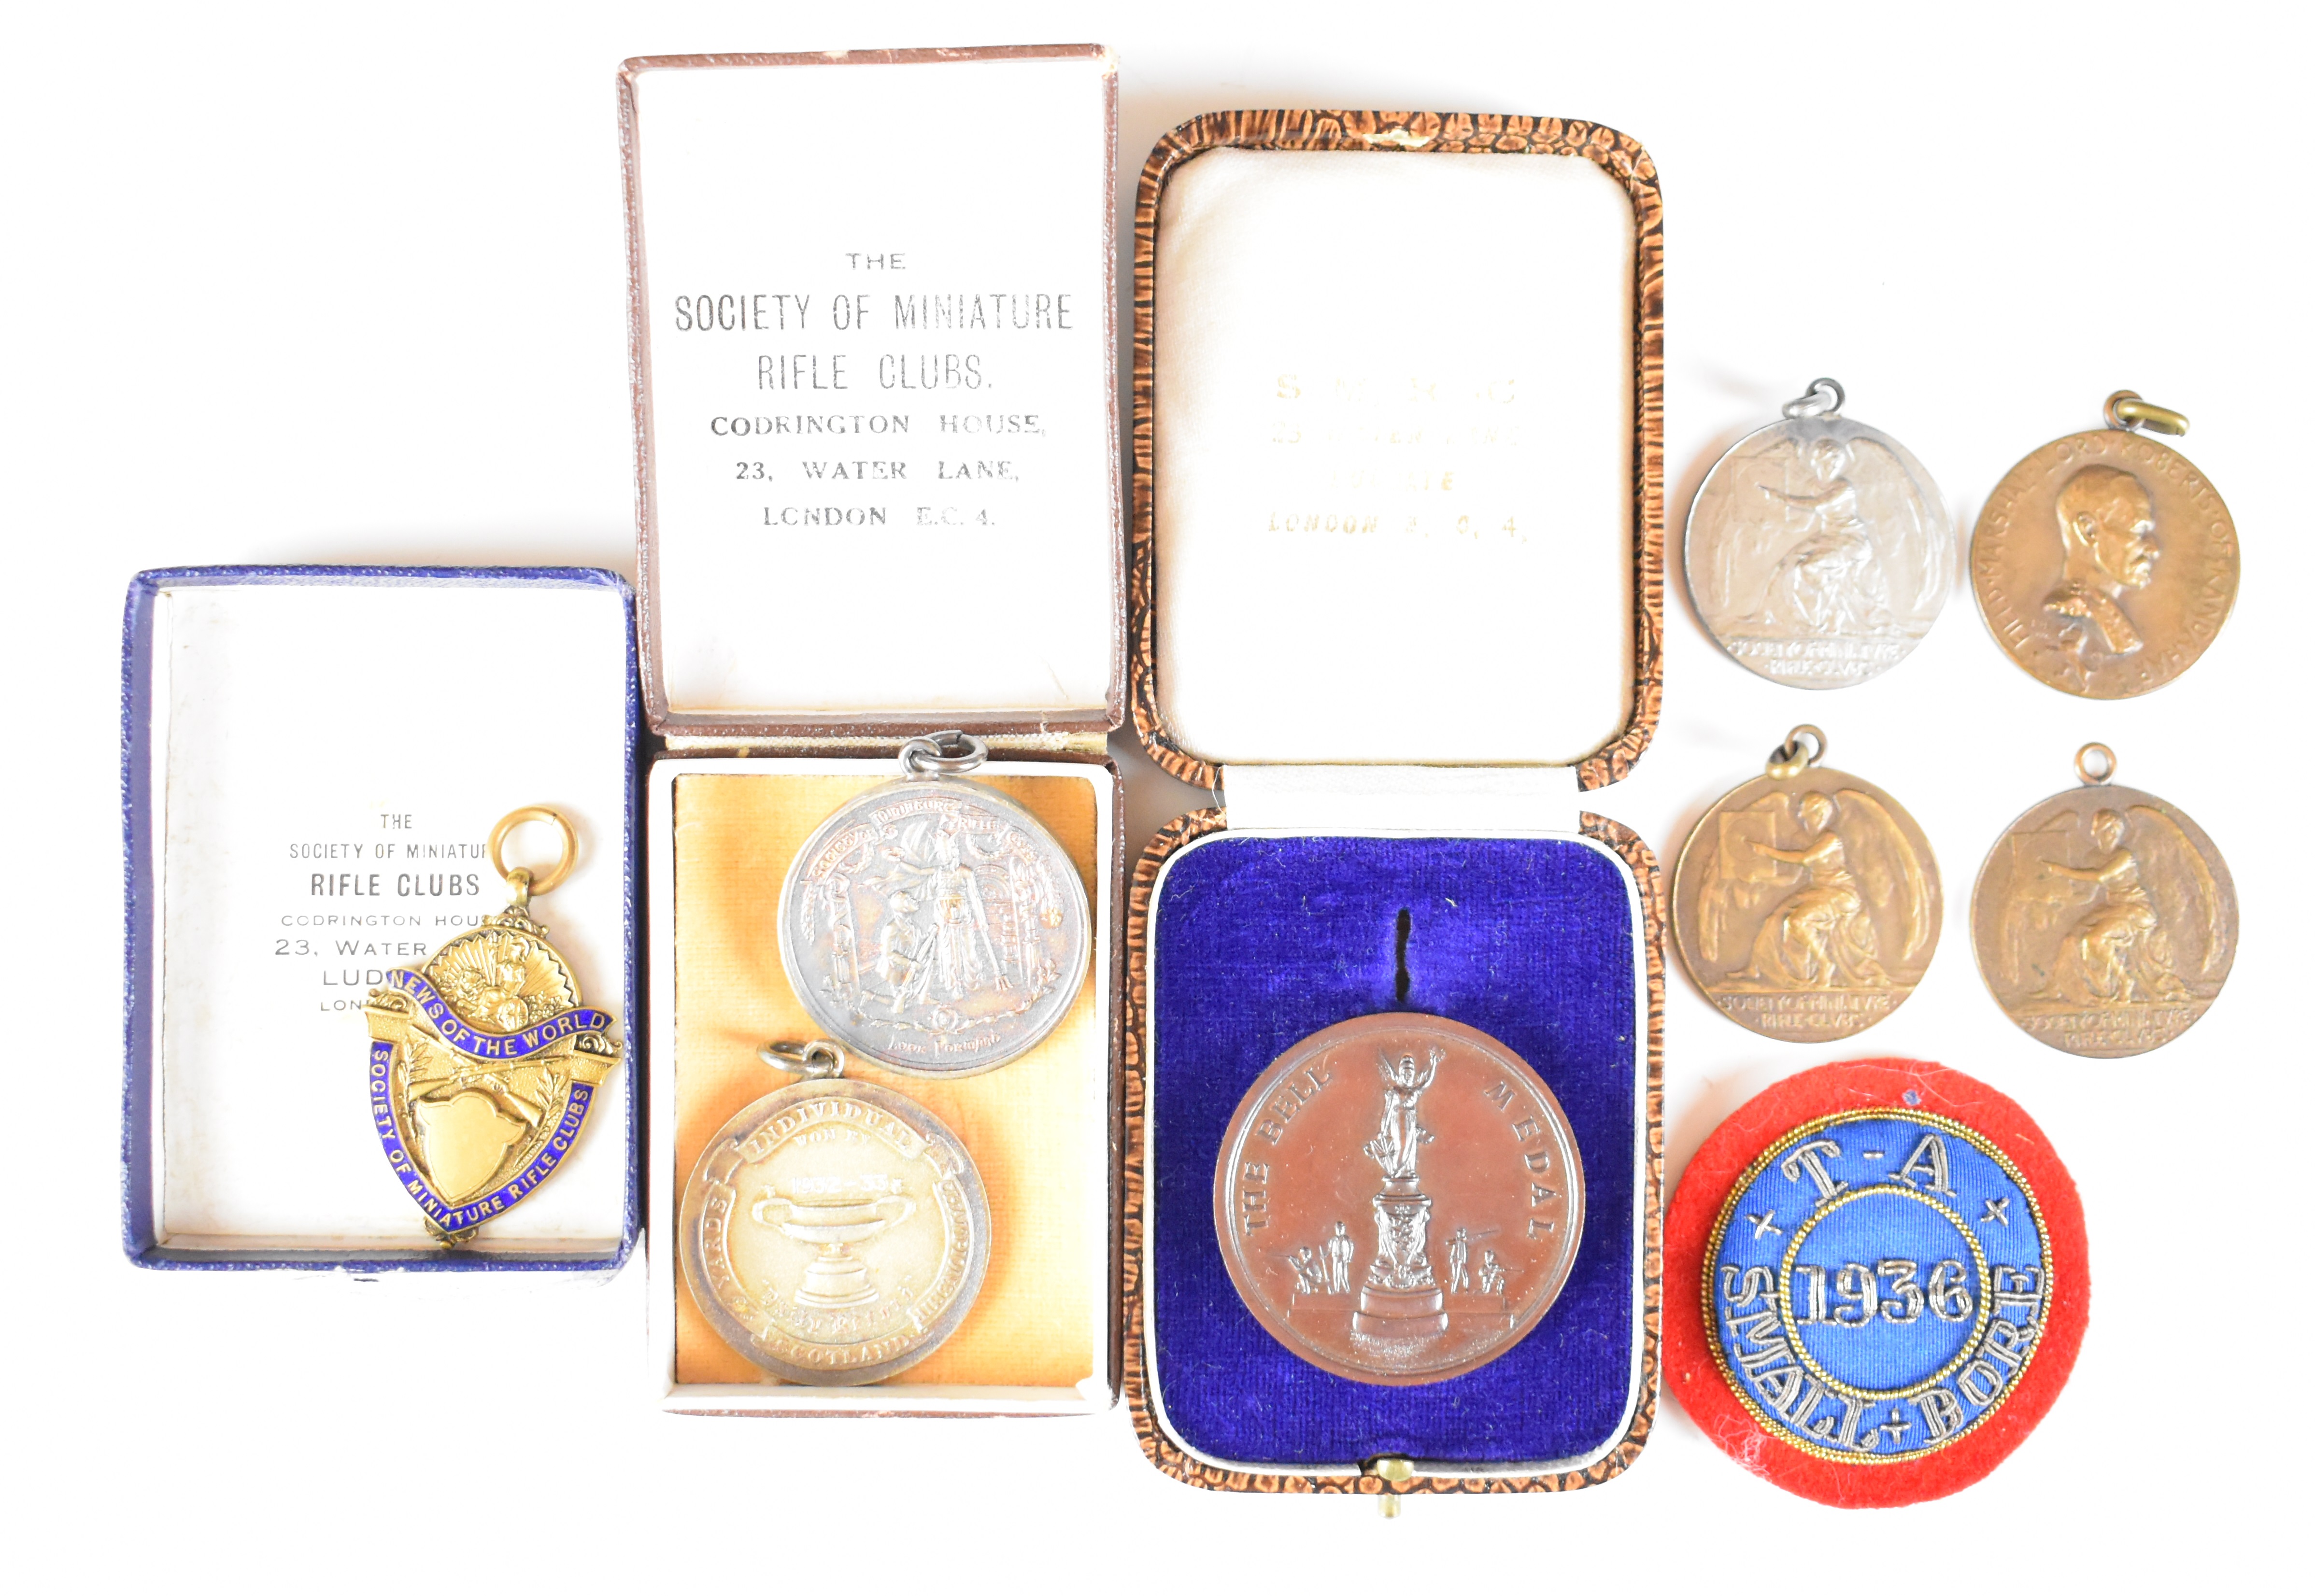 Eight Society of Miniature Rifle Clubs medals comprising two hallmarked silver examples (one